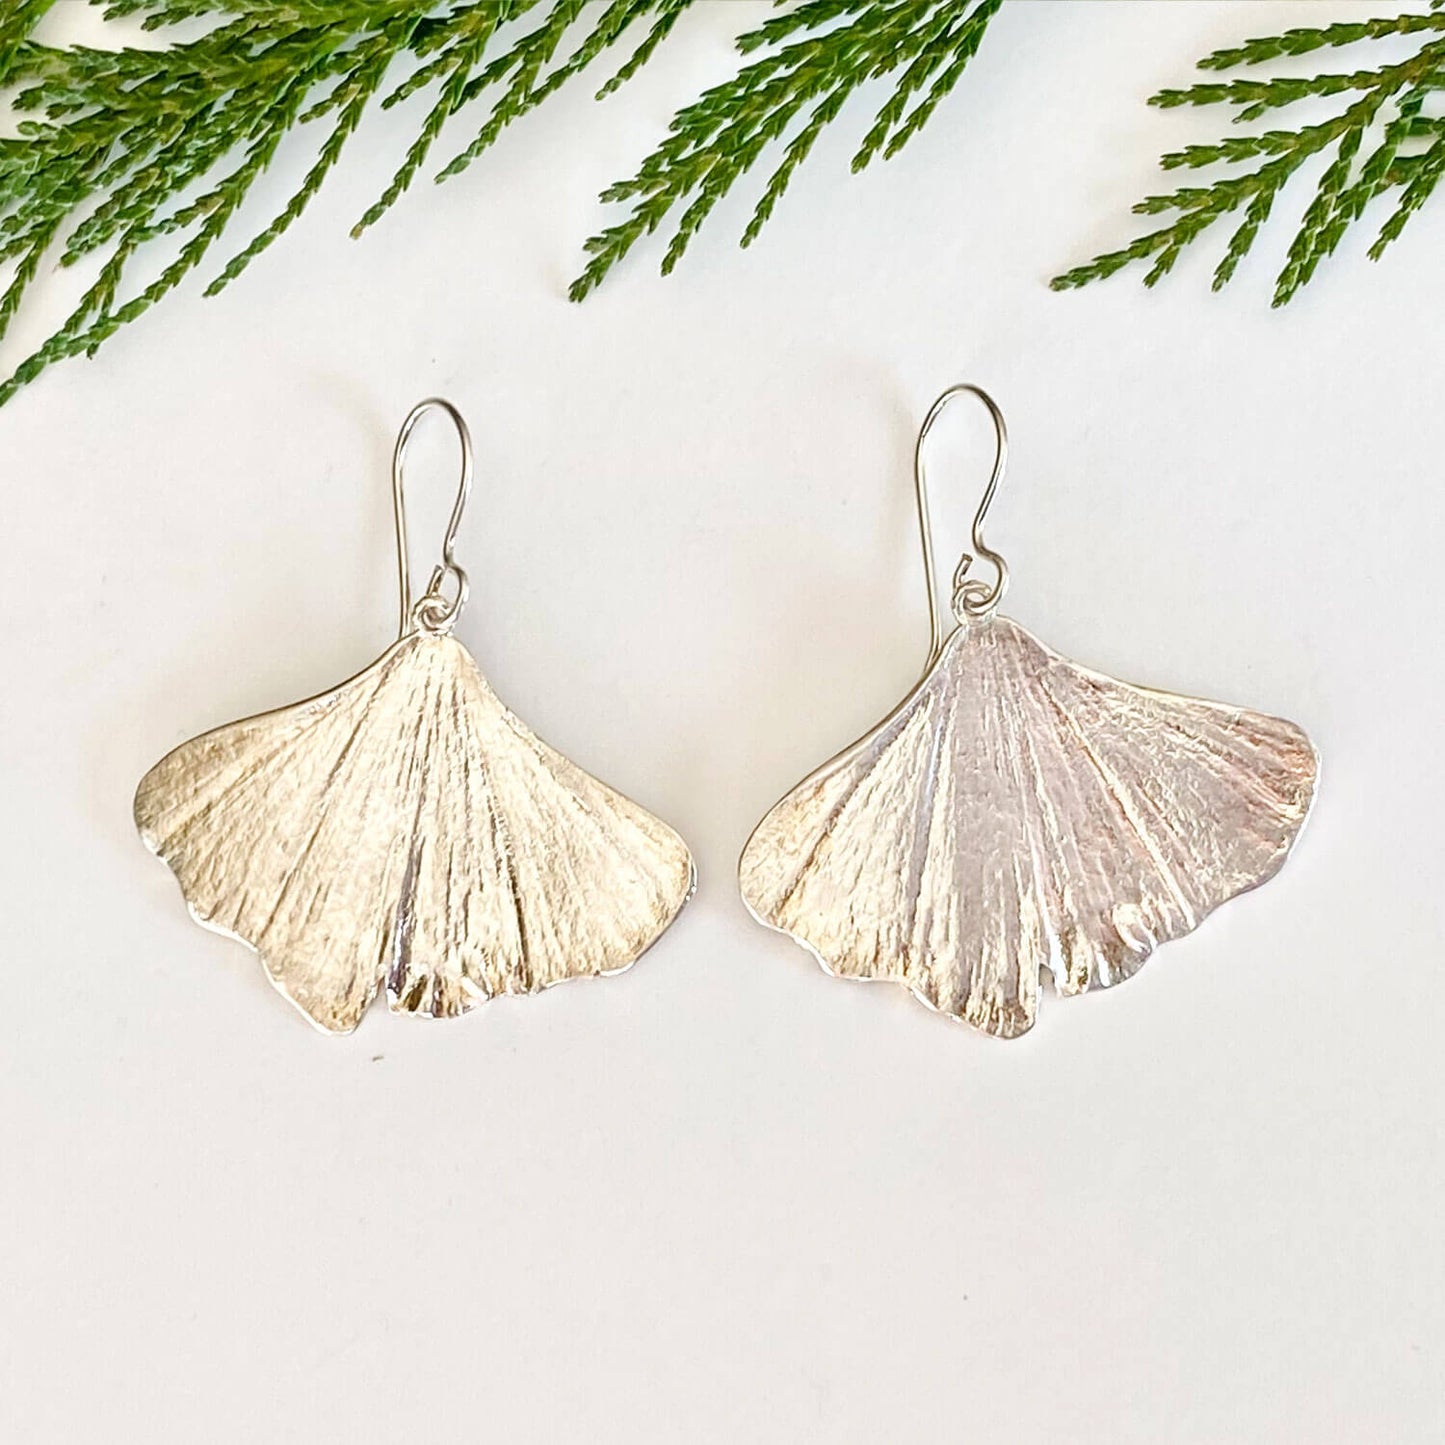 beautiful pair of silver ginkgo earrings on a white background with cedar boughs 